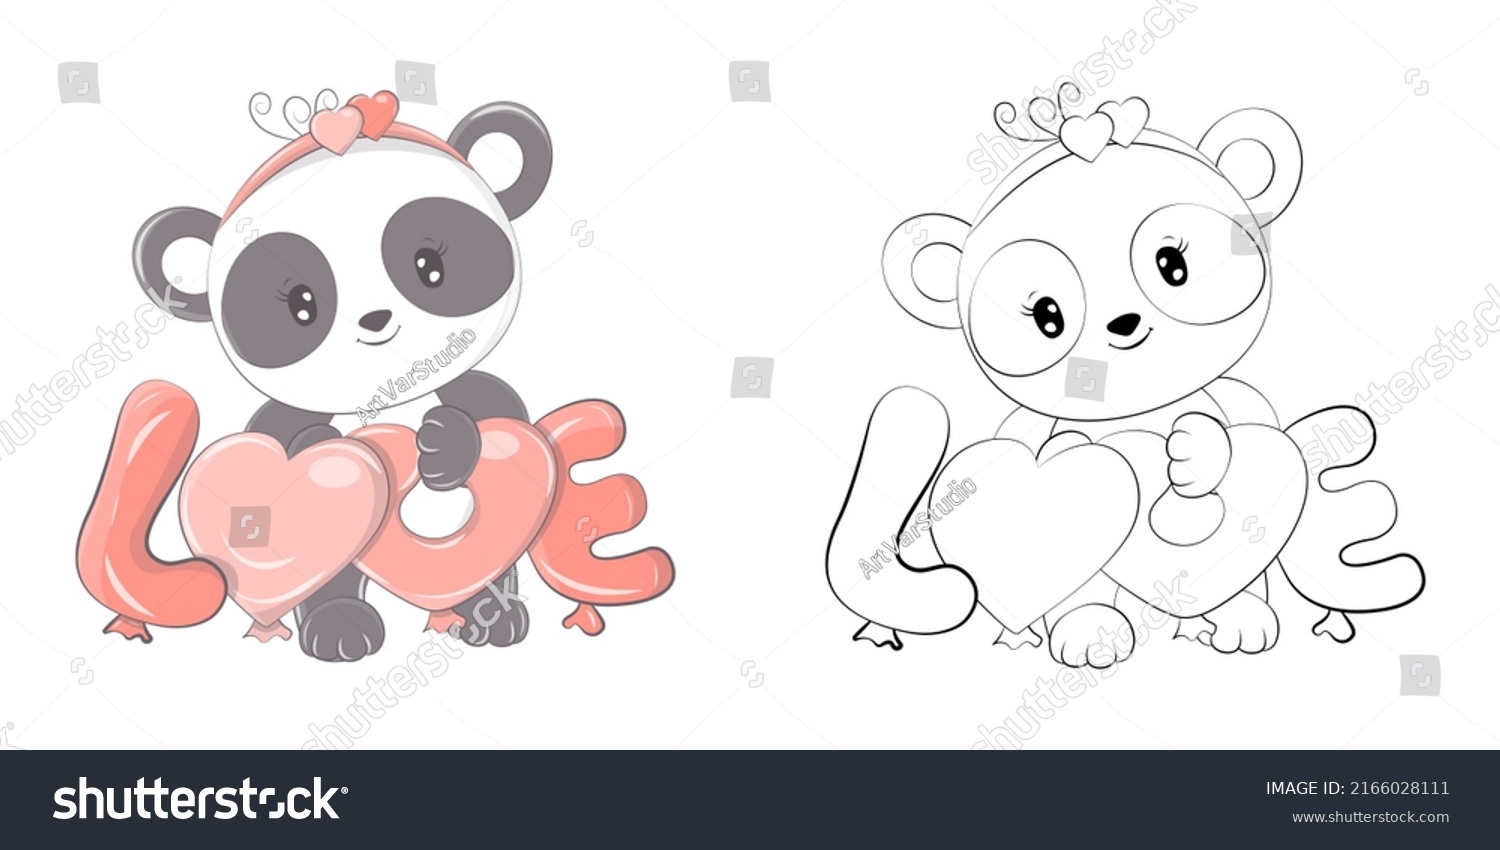 SVG of Panda Clipart for Coloring Page and Multicolored Illustration. Baby Clip Art Panda with Love Balloons. Vector Illustration of an Animal for Coloring Pages, Prints for Clothes, Stickers, Baby Shower.  svg